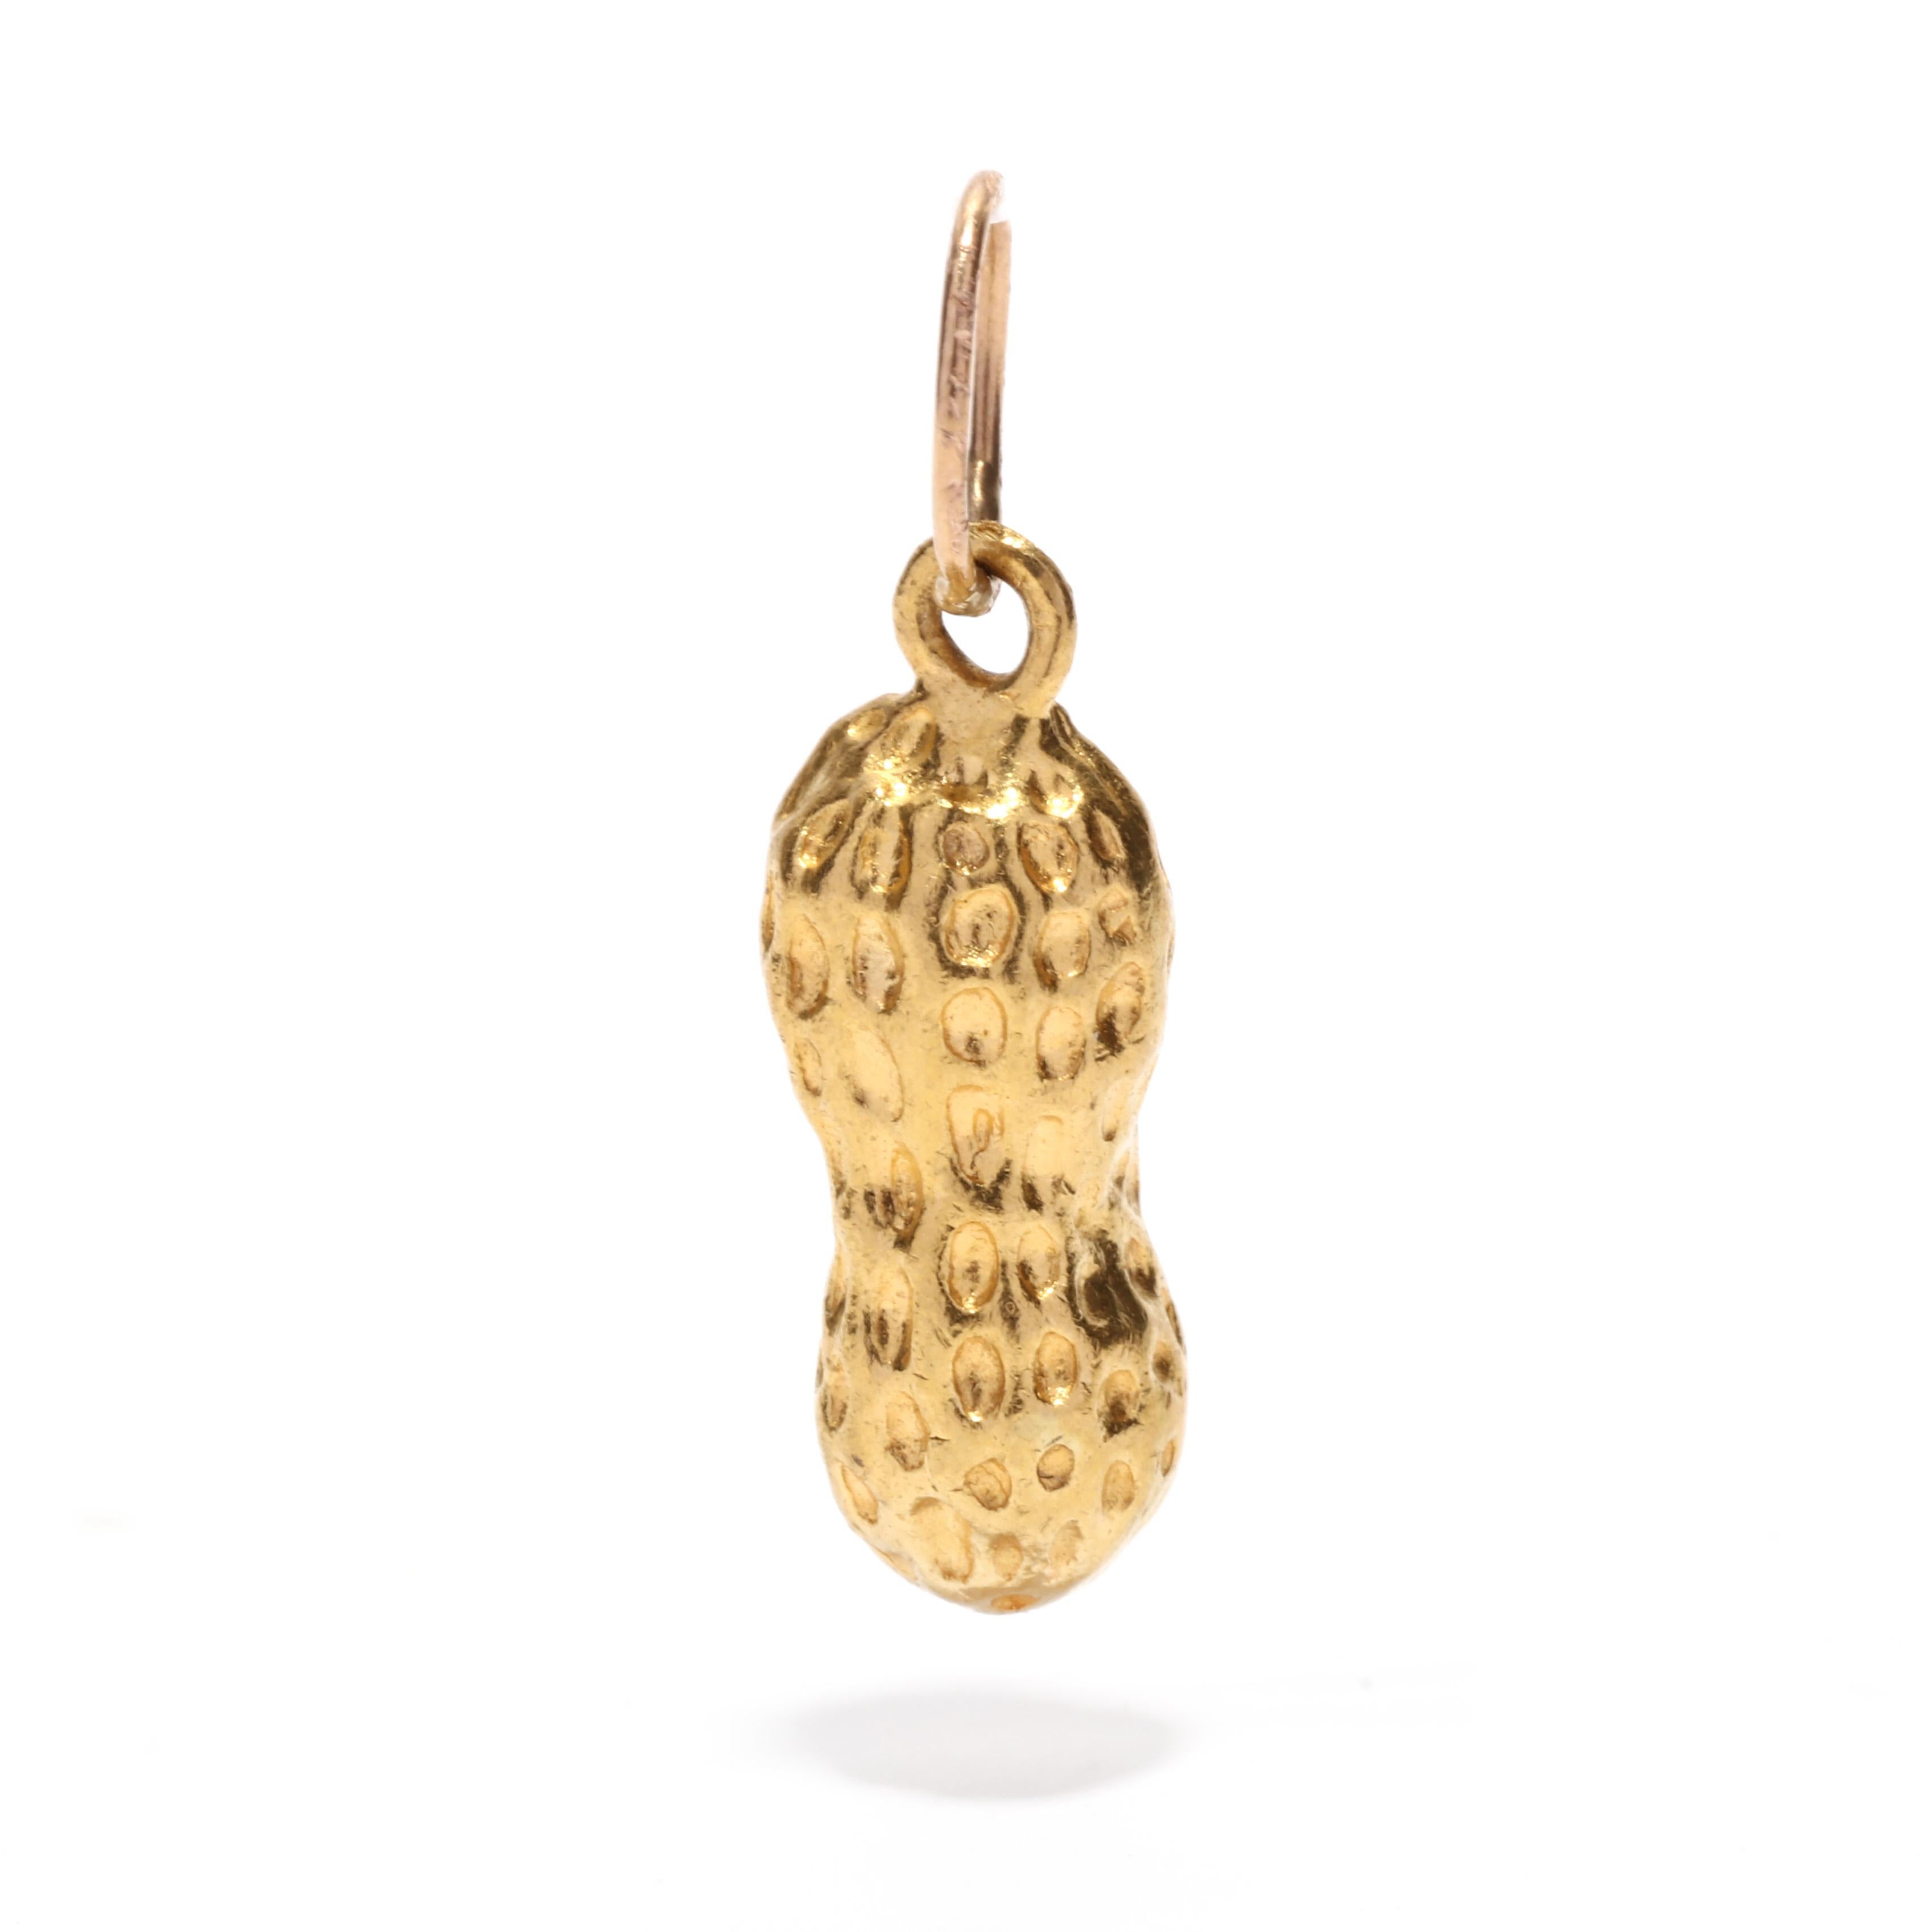 A vintage 23 karat yellow gold solid peanut charm. This small charm features a peanut motif suspended from a thin bail.

Length: 7/8 in.

Width: 1/4 in.

Weight: 1/3 dwts. / 2 grams

Metal: 23K (tested)

Ring Sizings & Modifications:
* We are happy